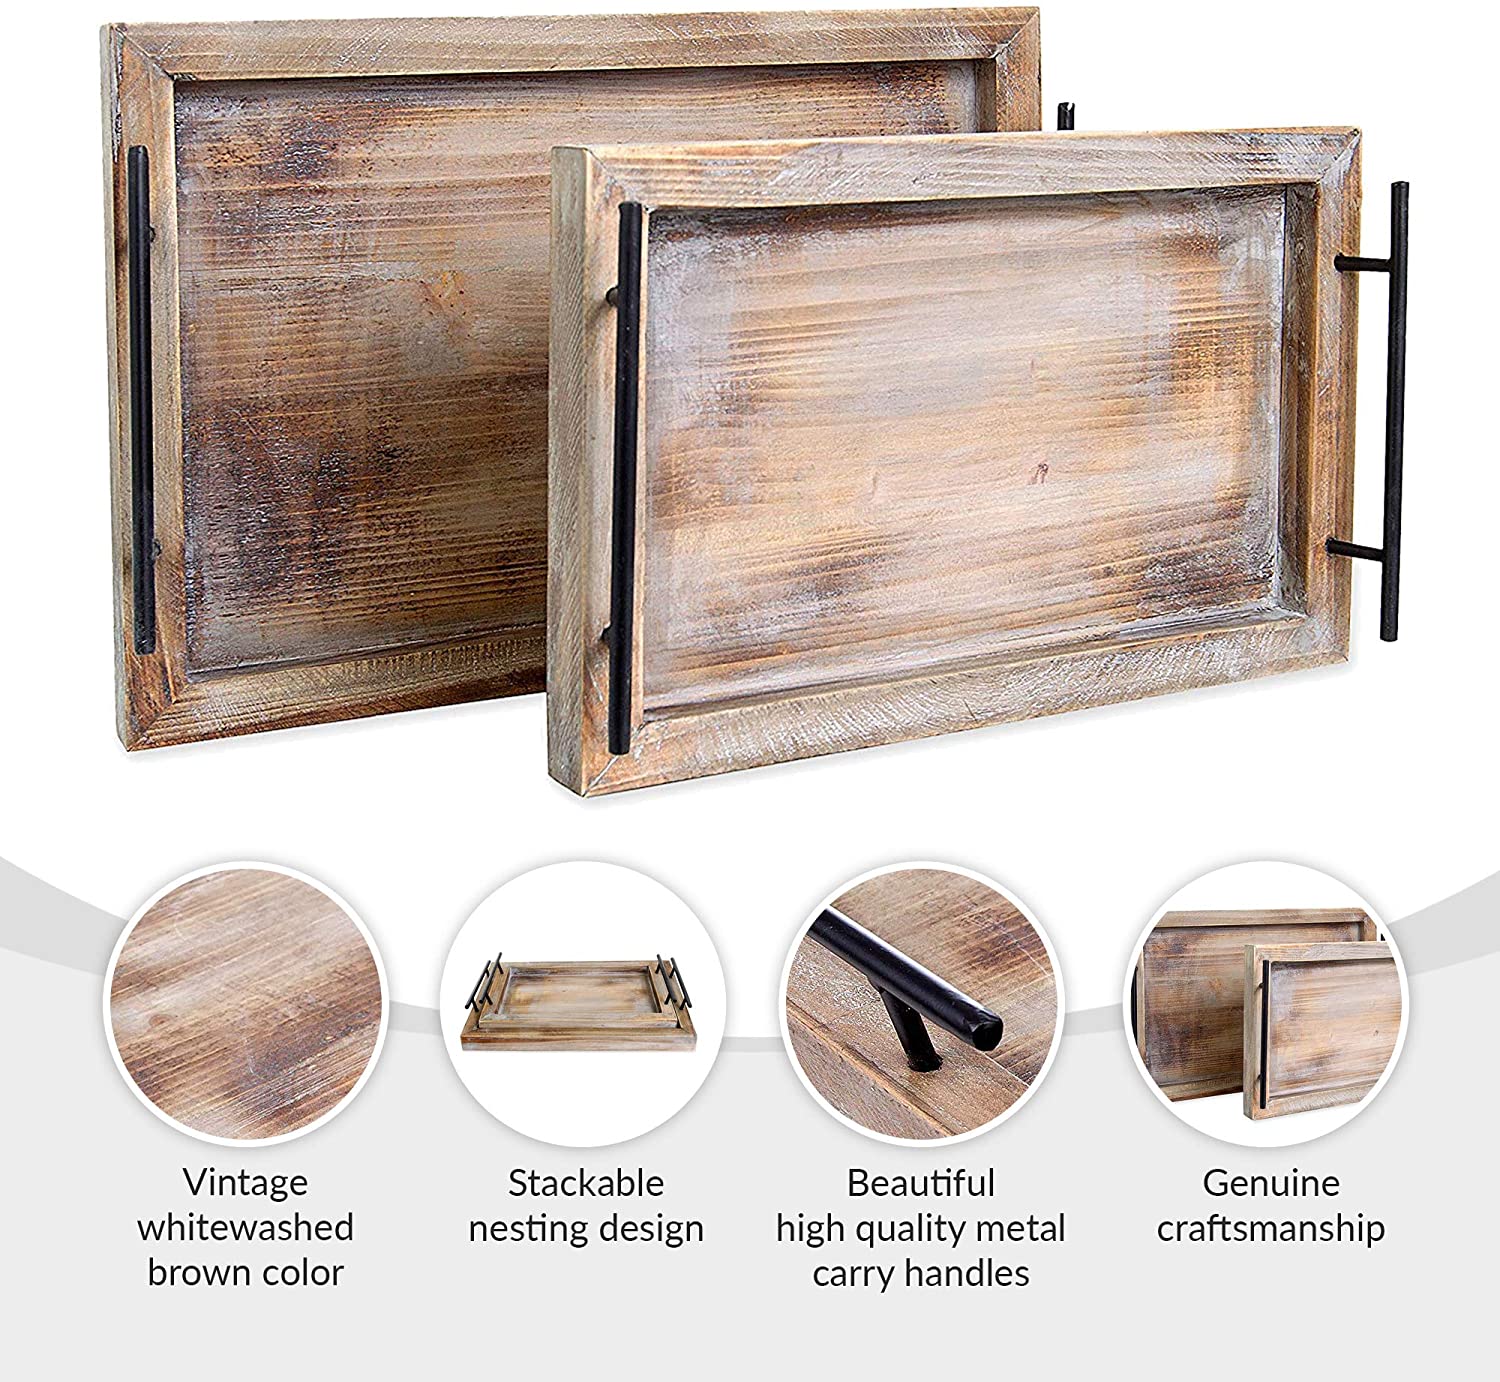 Wooden Serving Trays with Handles (2 Pc. Set) Rustic Color